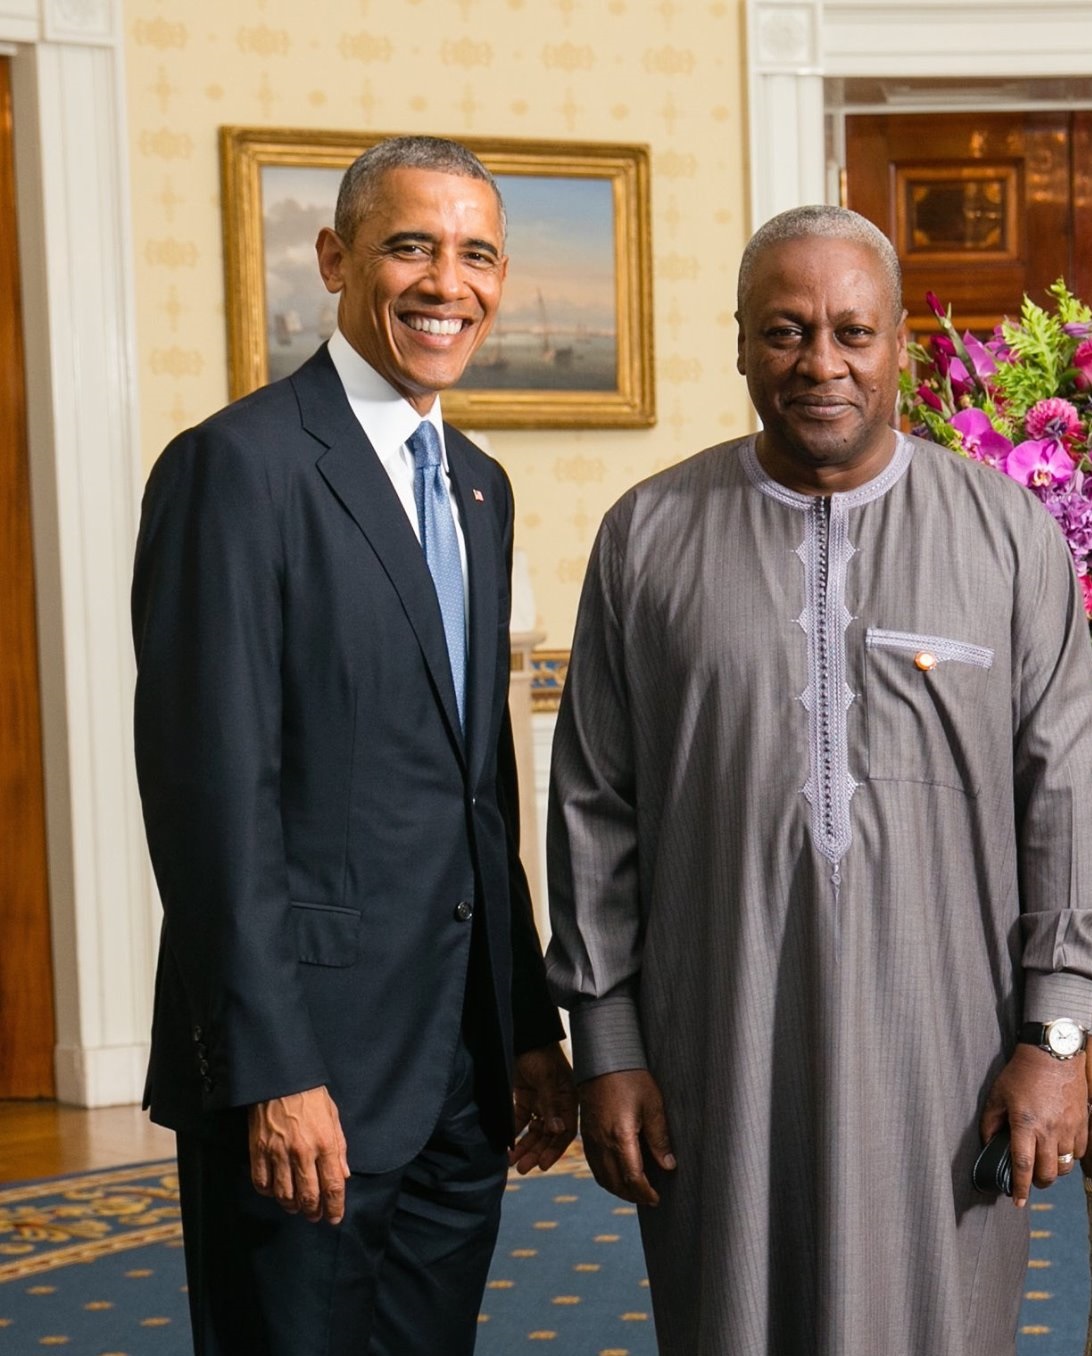 U.S. to Support Ghana in Conducting Credible Polls